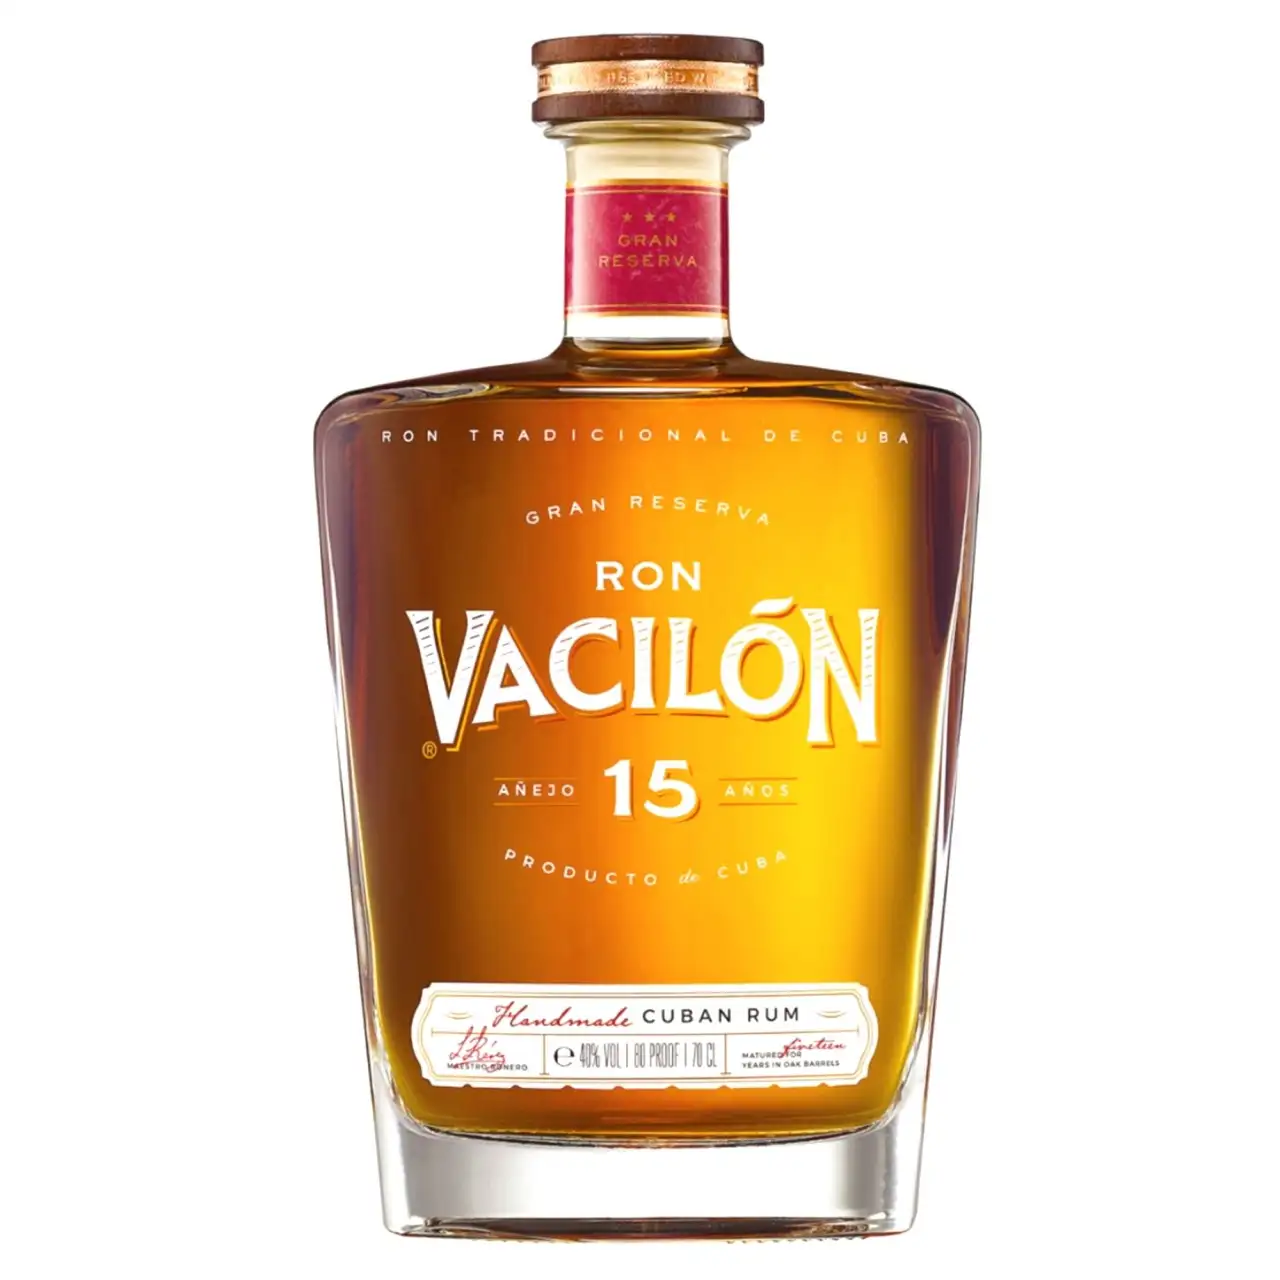 Image of the front of the bottle of the rum Vacilon Añejo 15 Años